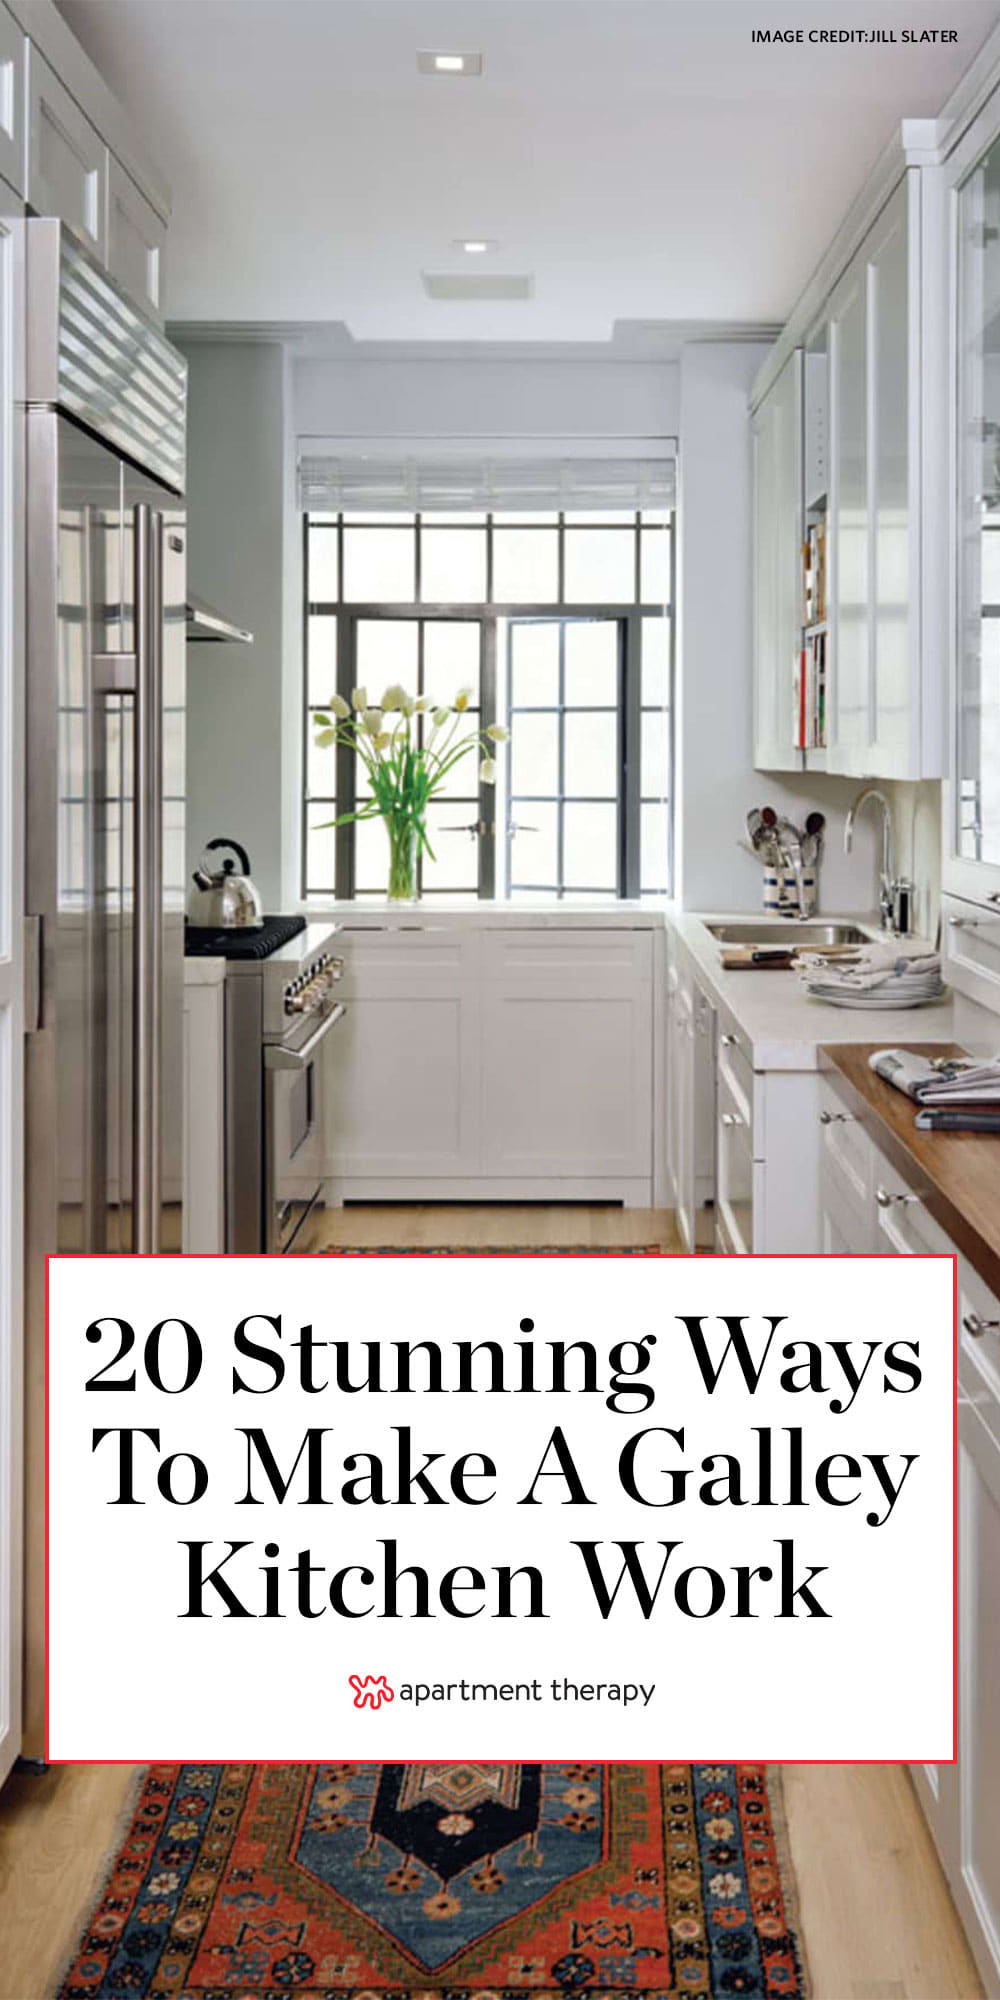 20 Galley Kitchen Ideas Photo Of Cool Galley Kitchens Apartment Therapy The kitchen in shaya is probably the size of an amtrak car, says alon shaya, executive chef and partner at shaya restaurant. 20 galley kitchen ideas photo of cool